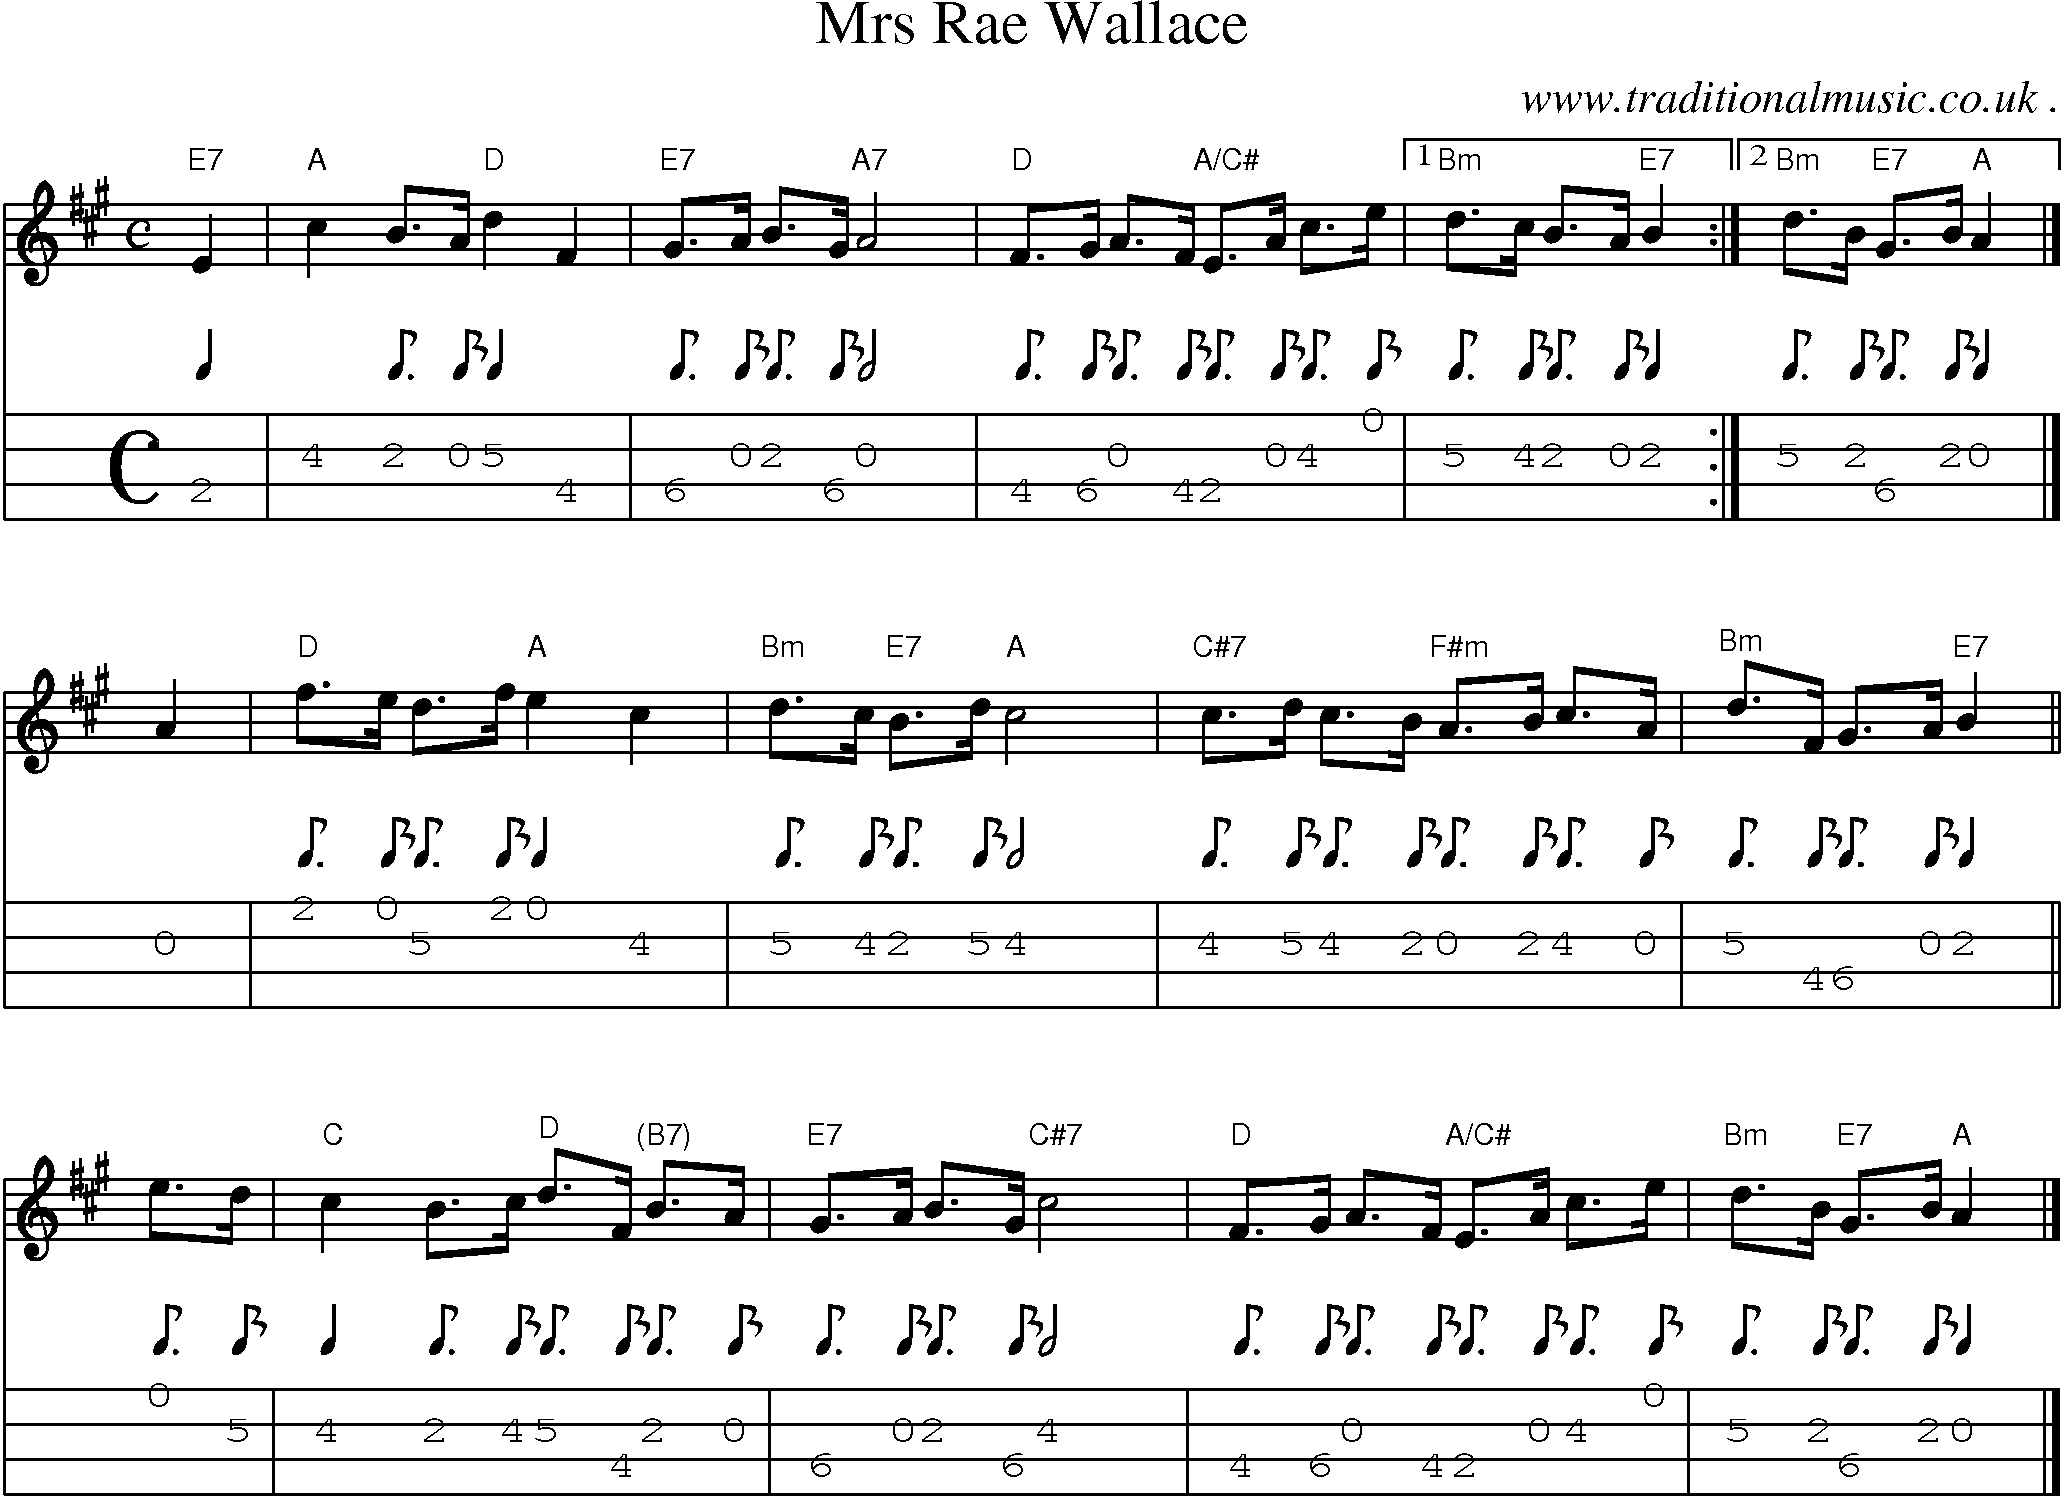 Sheet-music  score, Chords and Mandolin Tabs for Mrs Rae Wallace